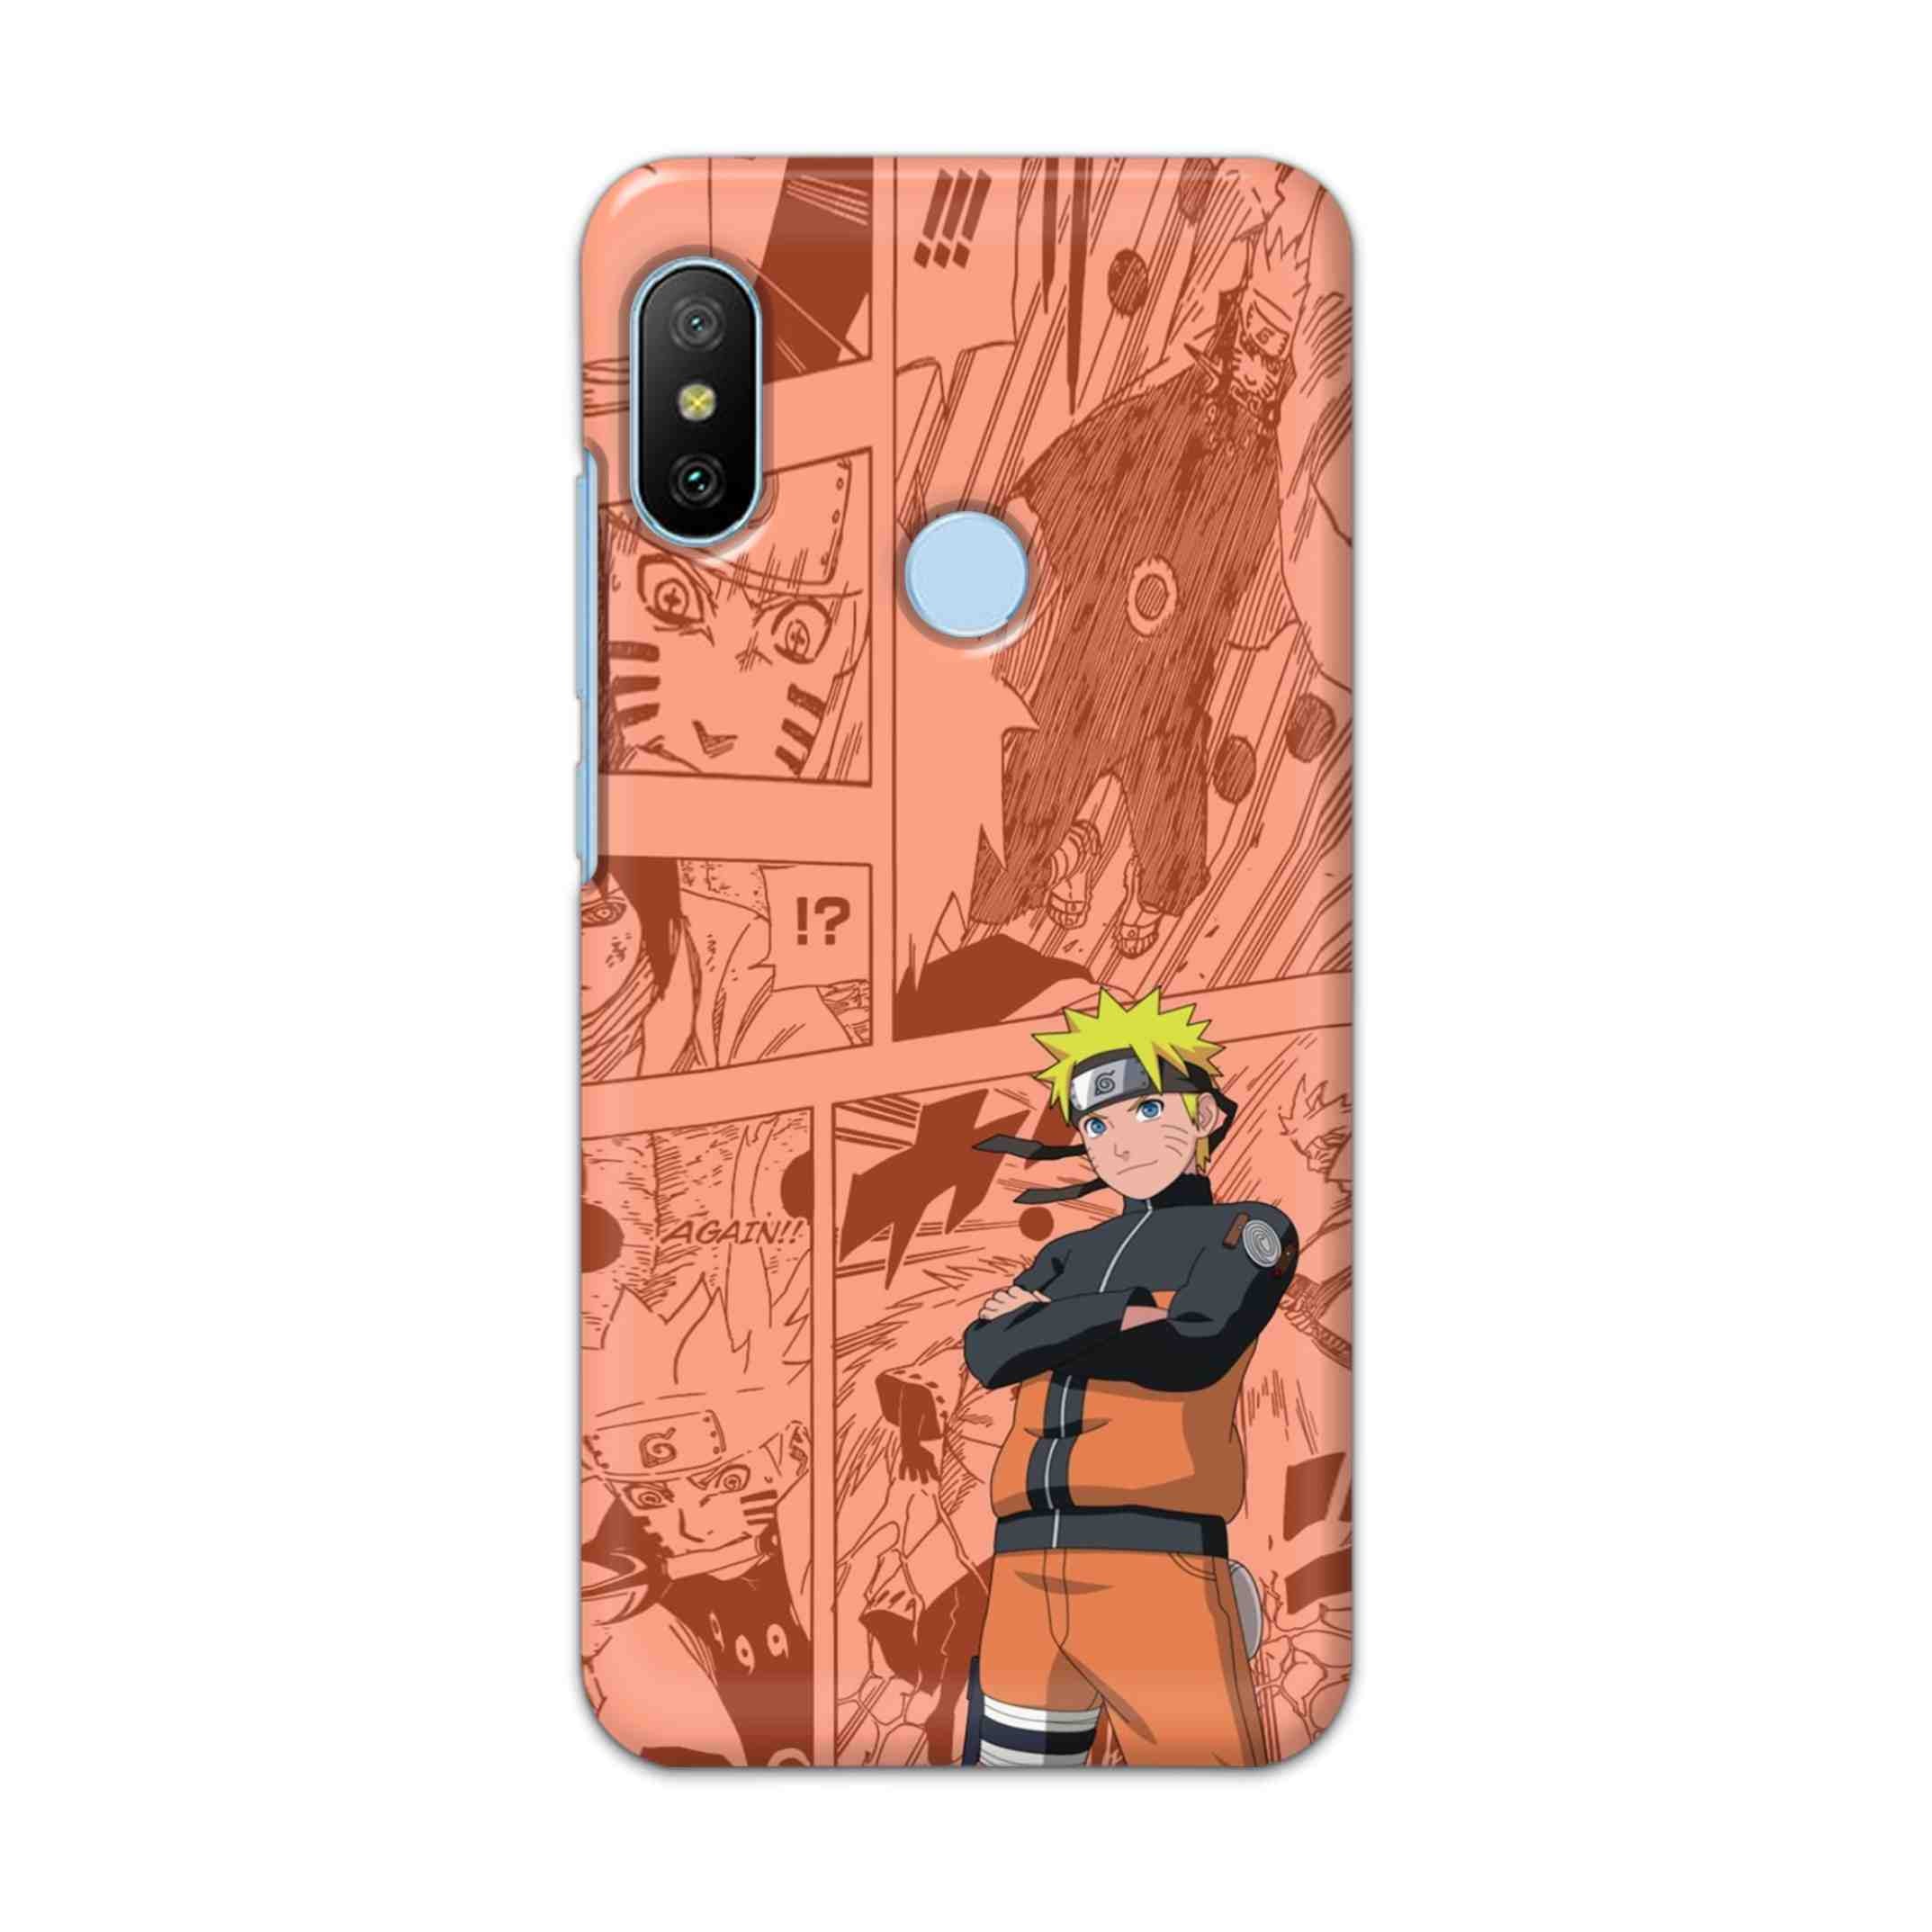 Buy Naruto Hard Back Mobile Phone Case/Cover For Xiaomi Redmi 6 Pro Online